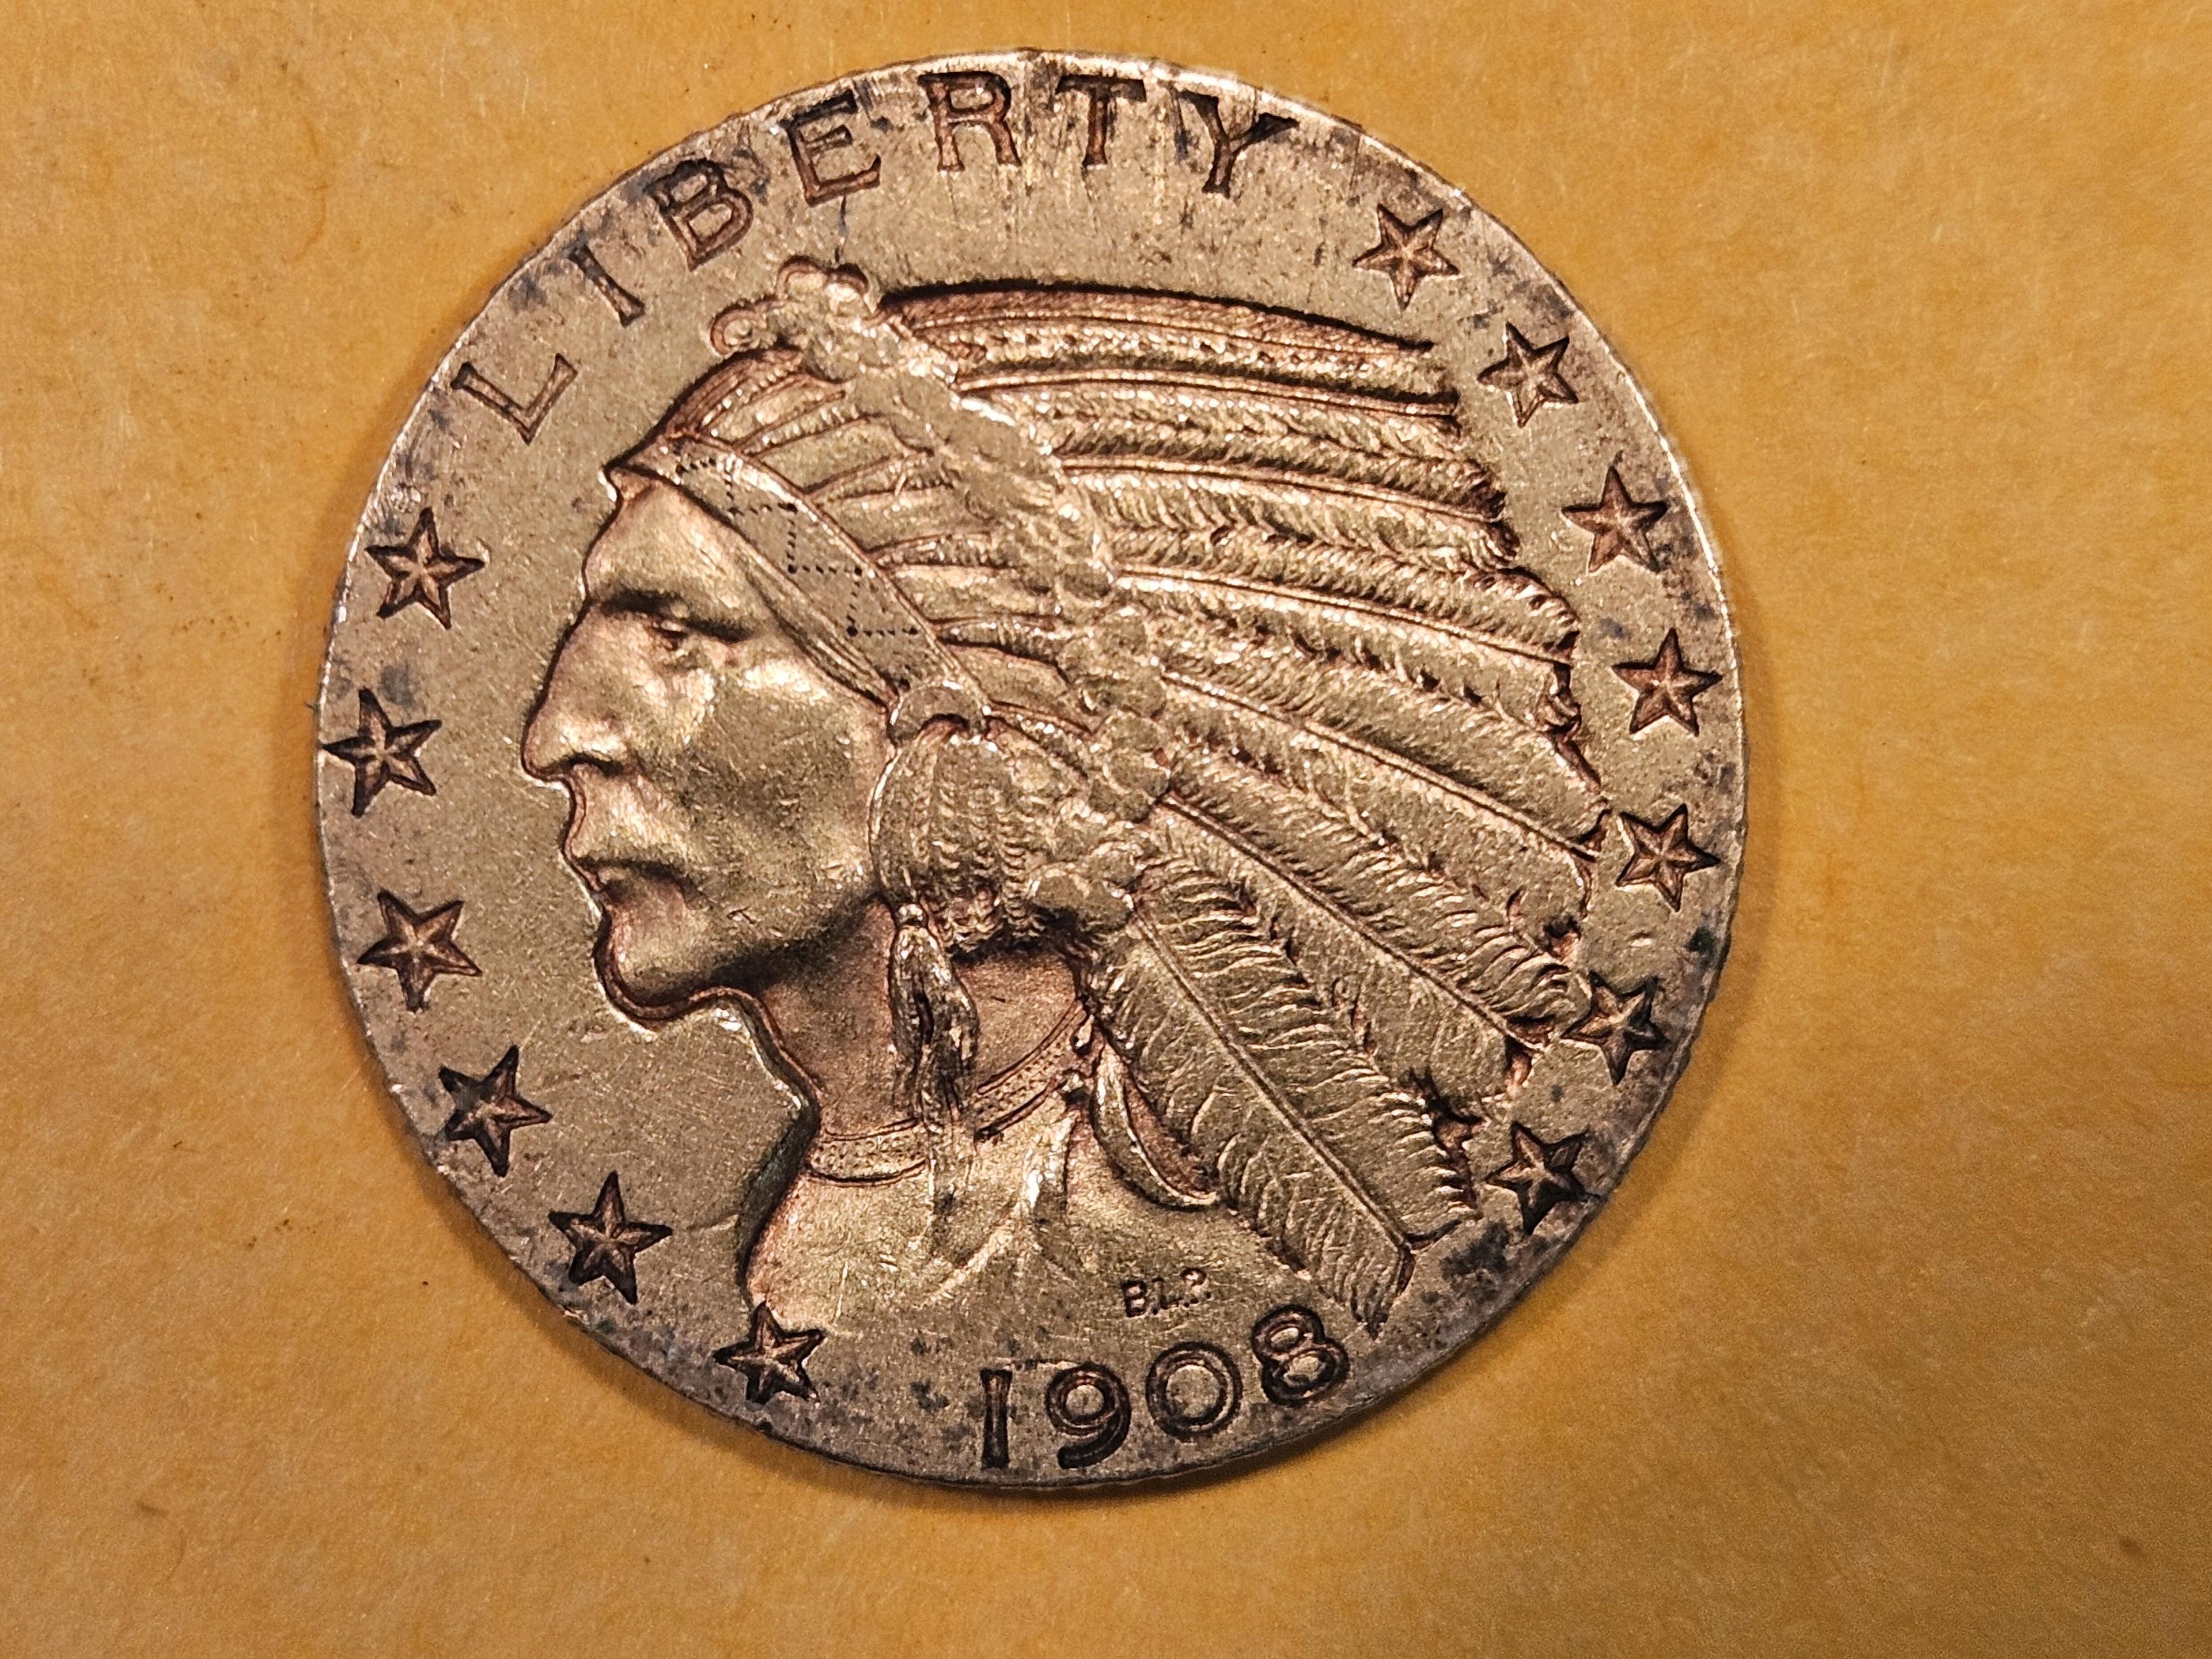 GOLD! 1908 Gold Five Dollar Indian in About Uncirculated